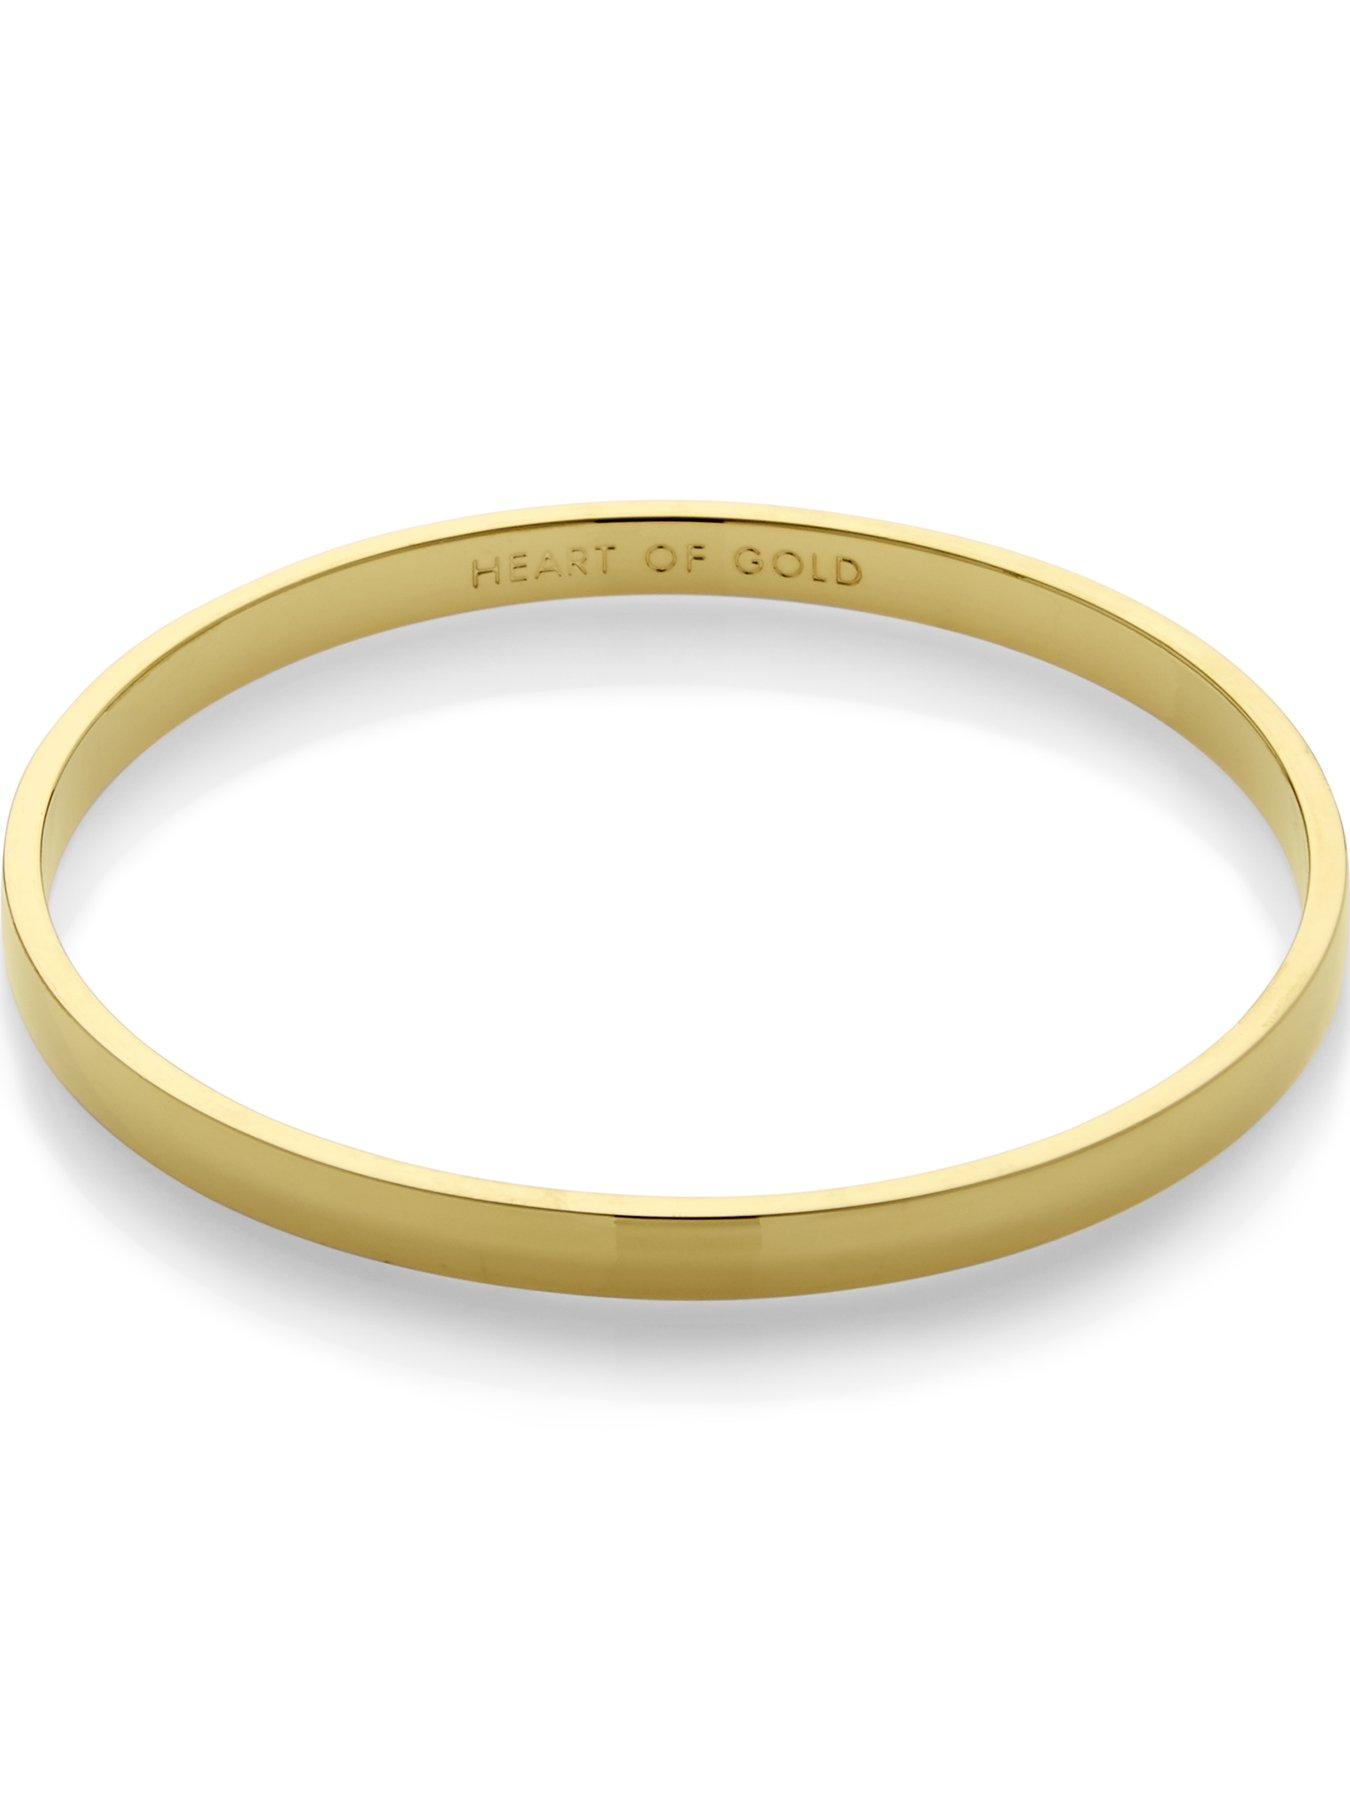 kate spade new york Bracelet, 12k Gold-Plated Heart of Gold Idiom